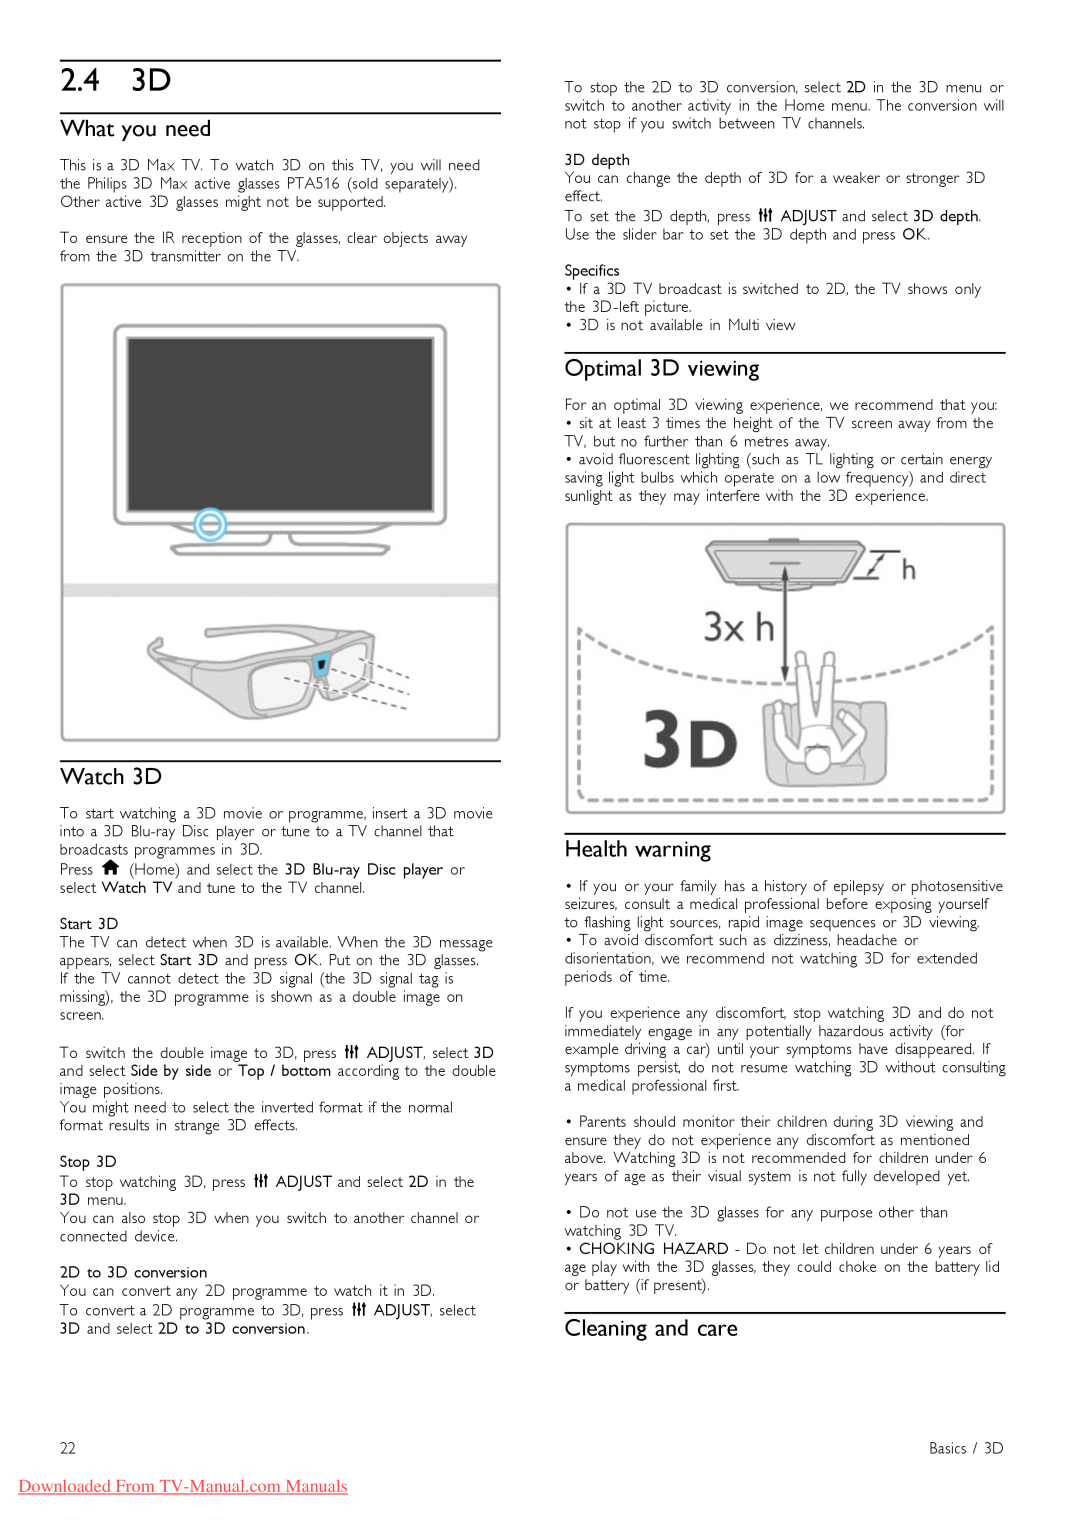 Philips 46PFL9706 manual 2.4 3D, What you need, Watch 3D, Optimal 3D viewing, Health warning, Cleaning and care 